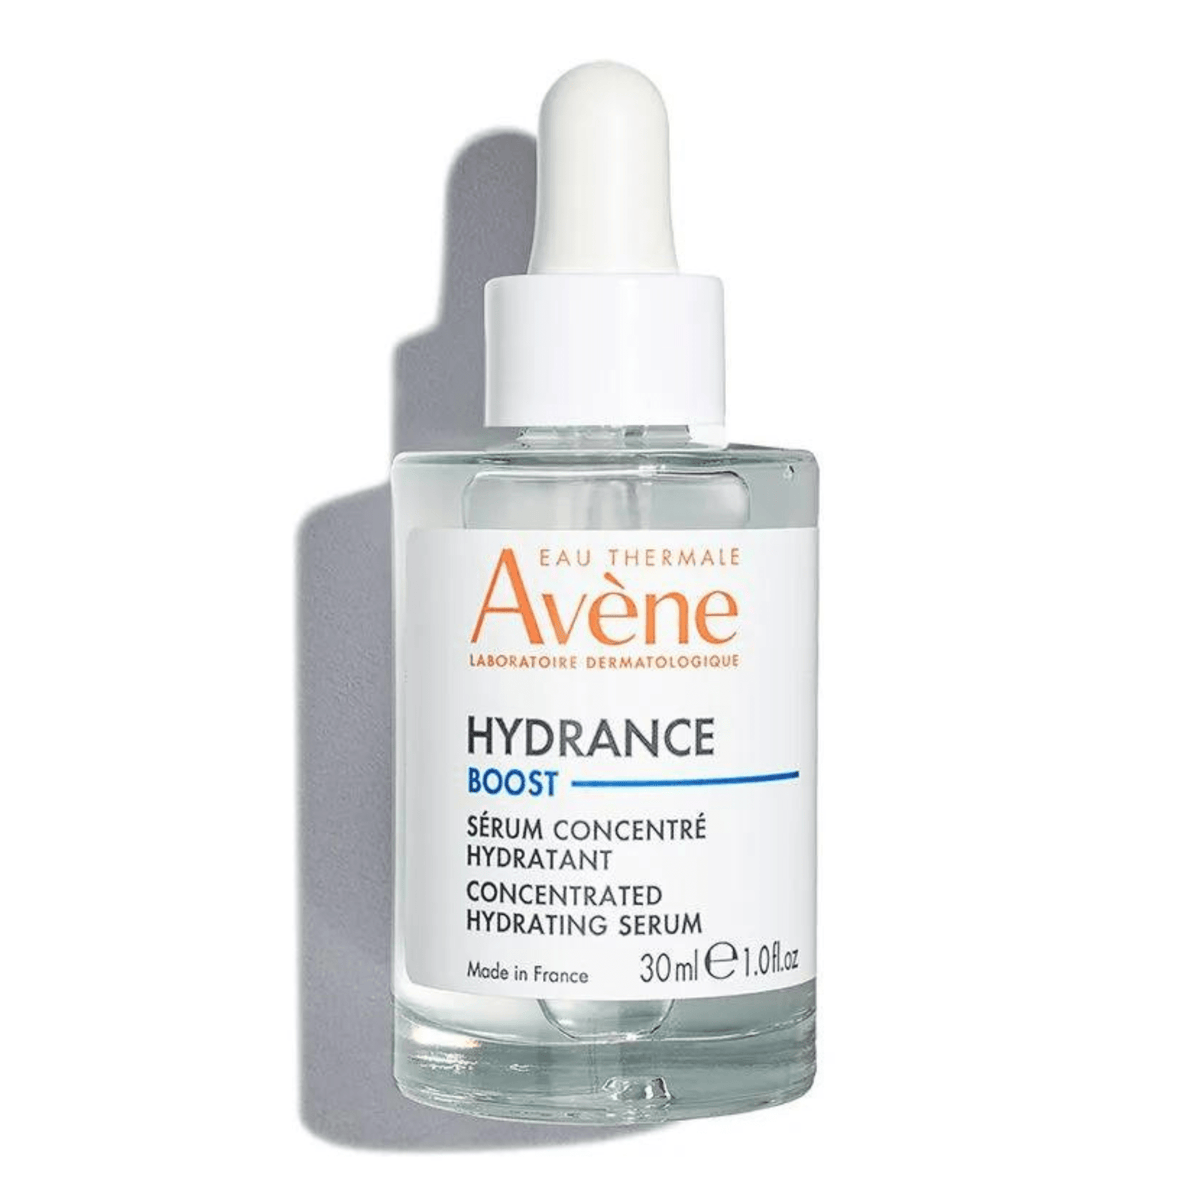 Primary Image of Hydrance Boost Serum